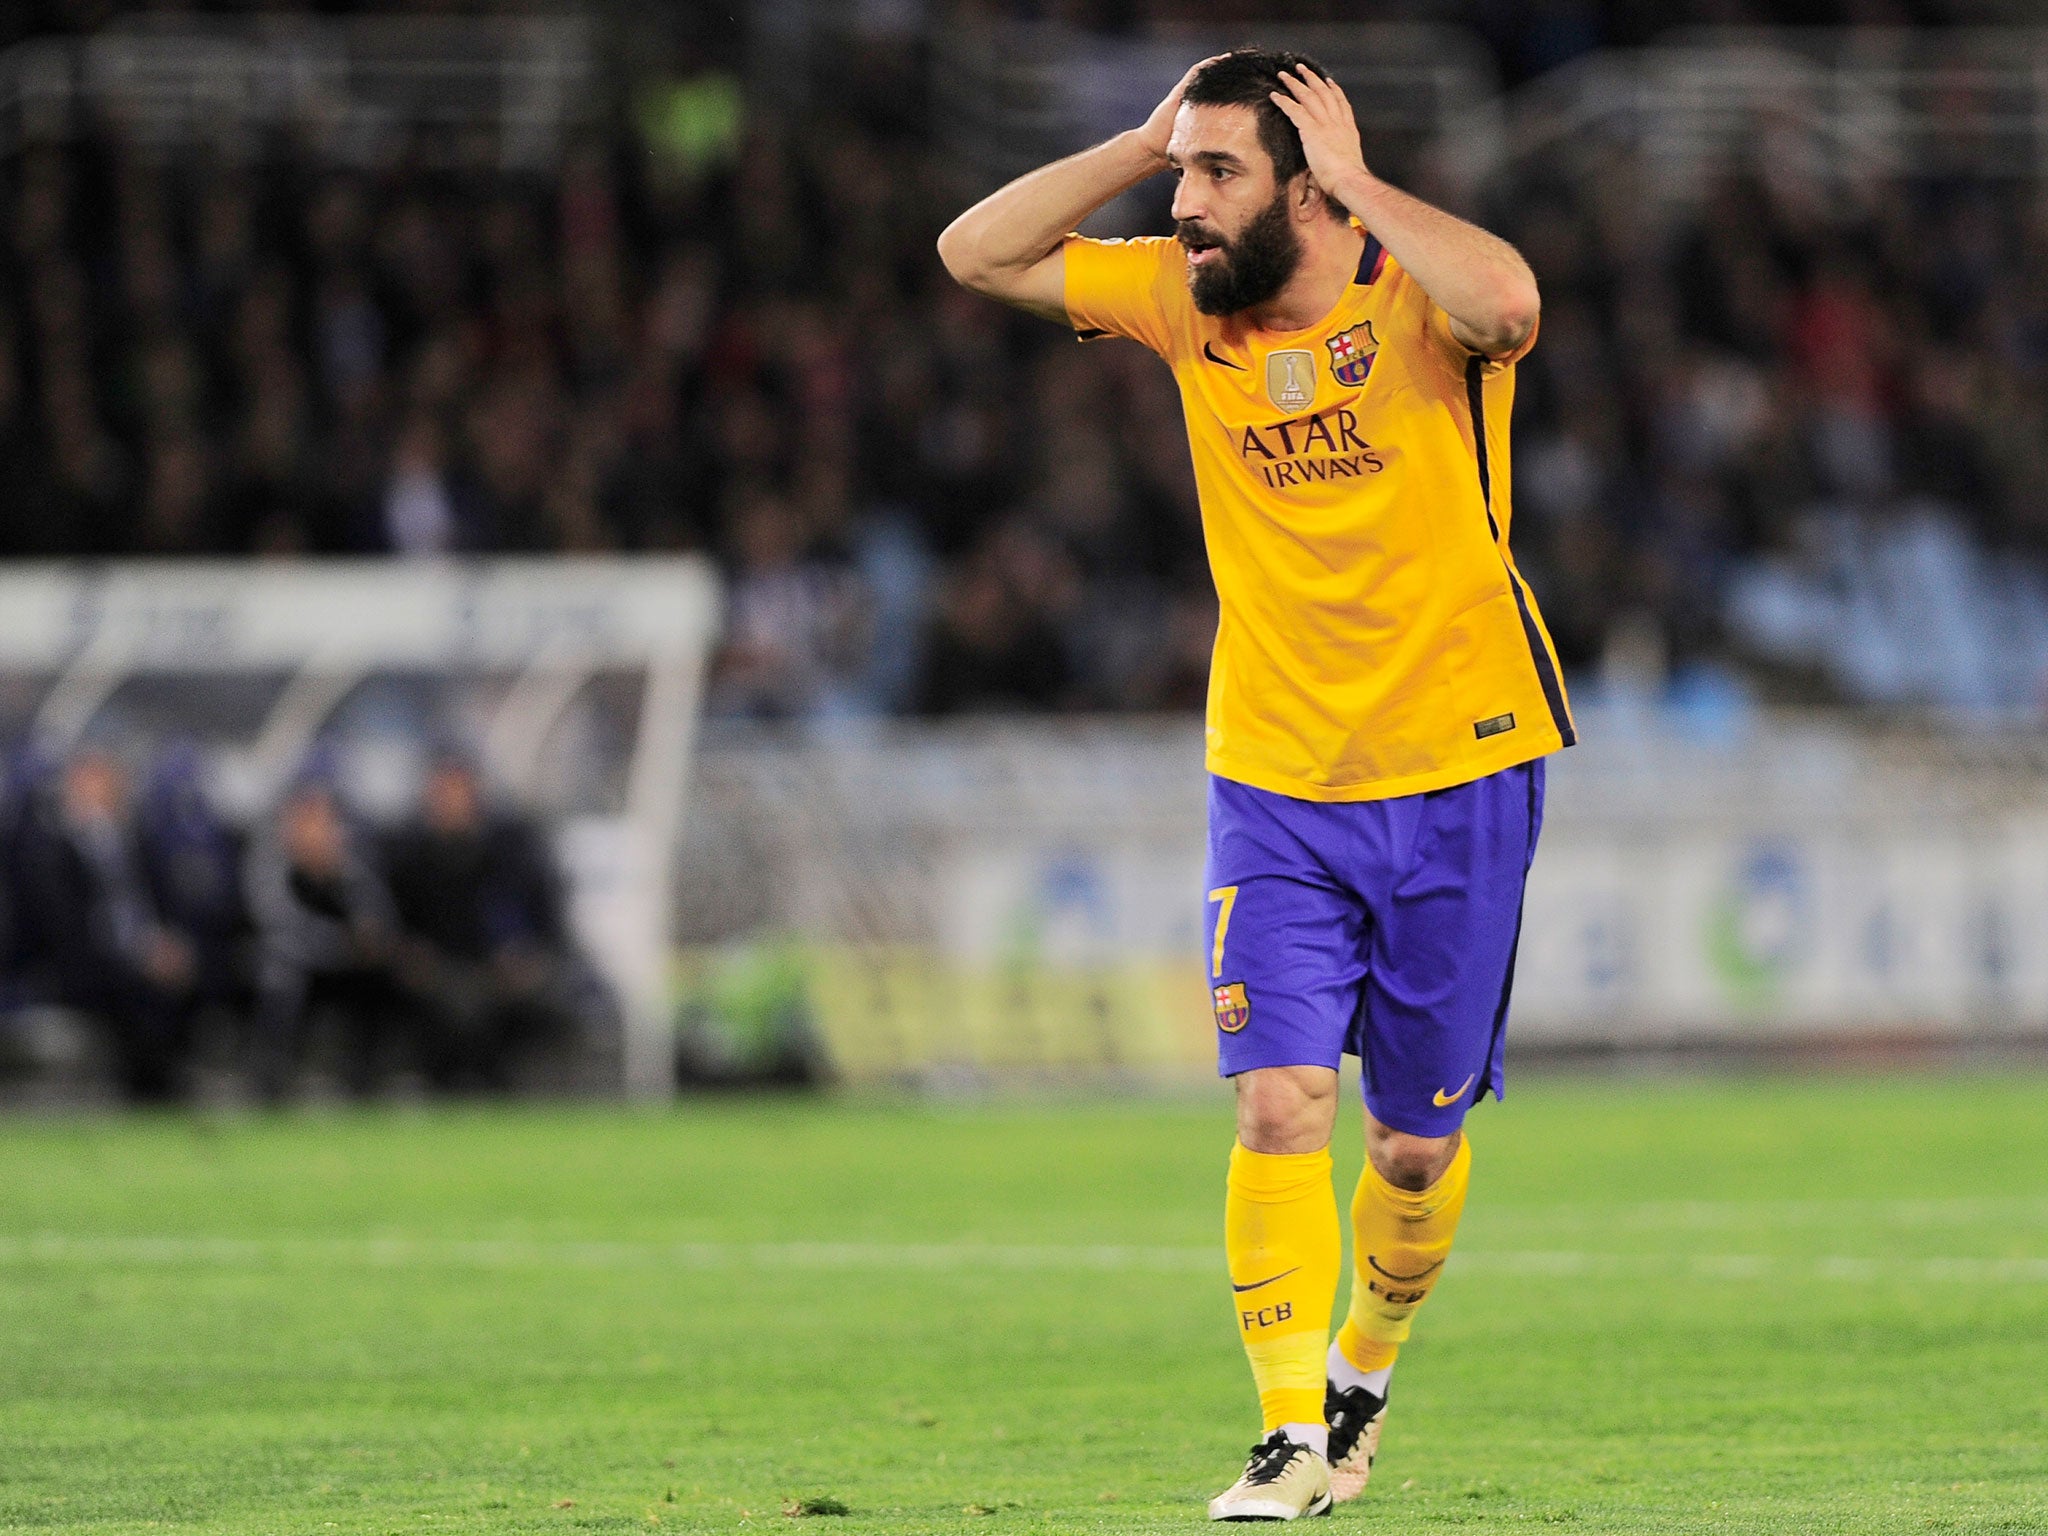 Turan only made 13 appearances for Barcelona across all competitions last season